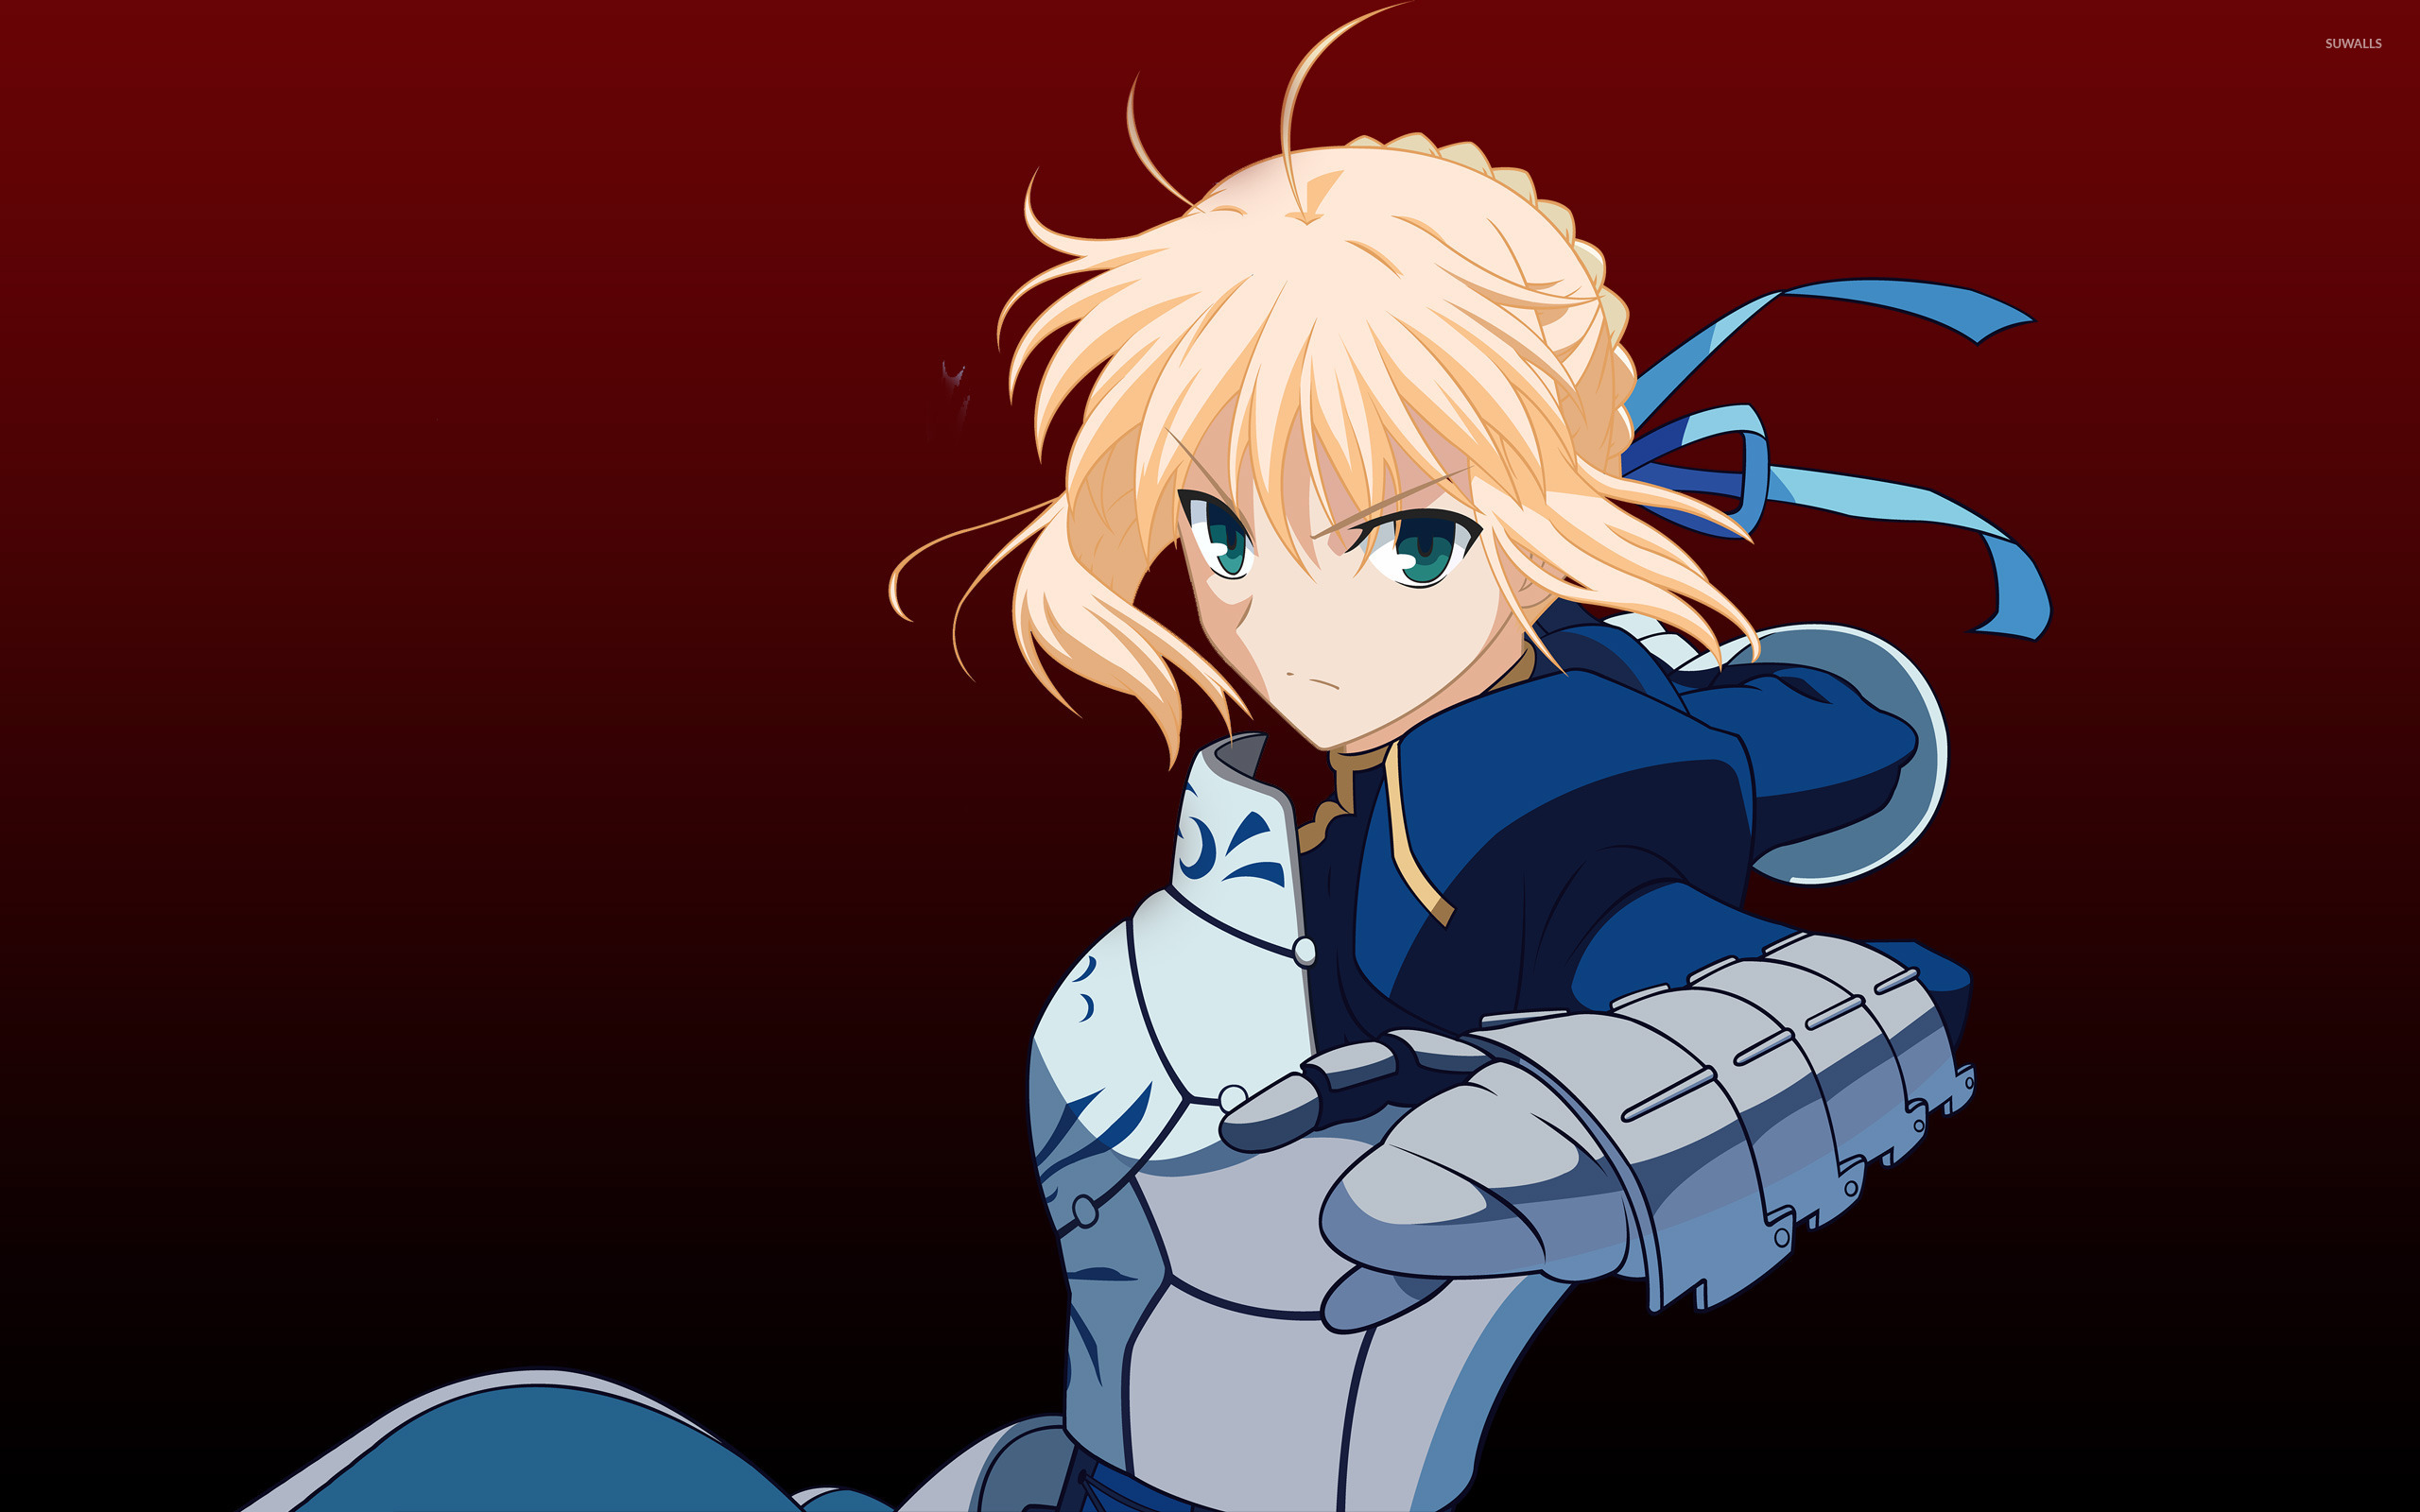 Free download Saber Fatestay night wallpaper Anime wallpapers 9463